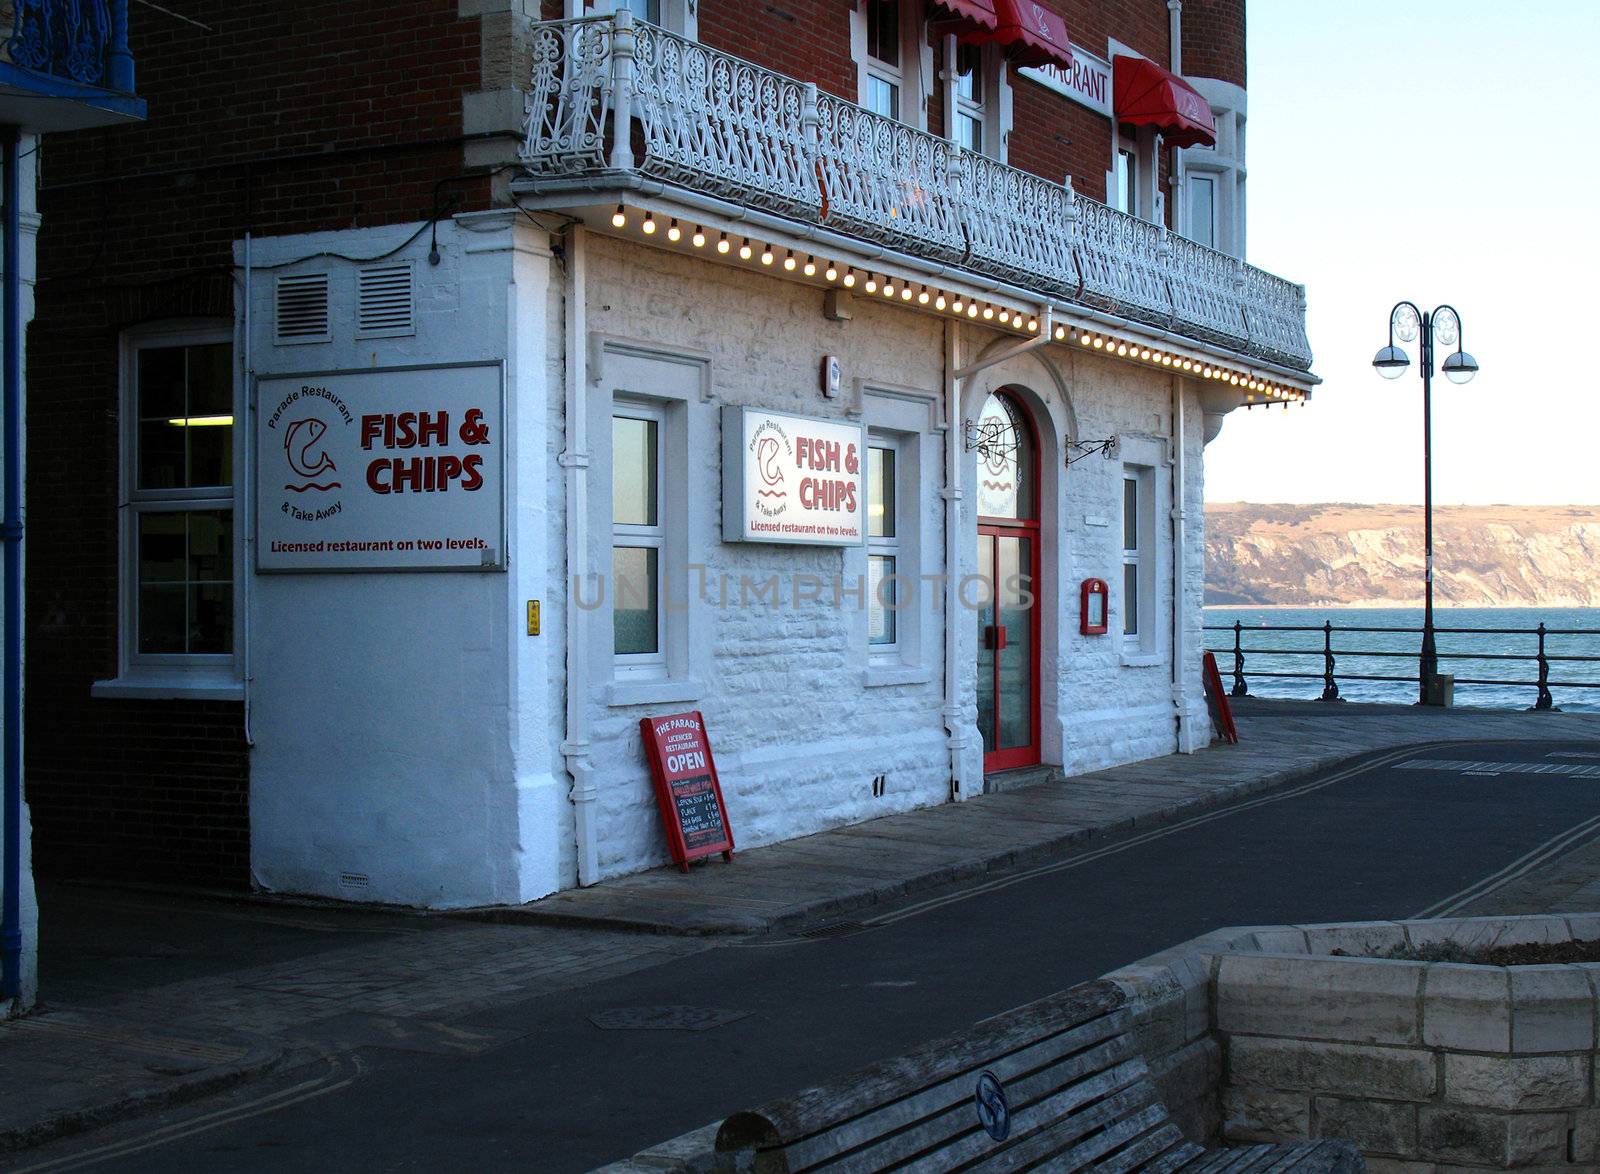 Fish and Chip Restaurant at Swanage by tommroch